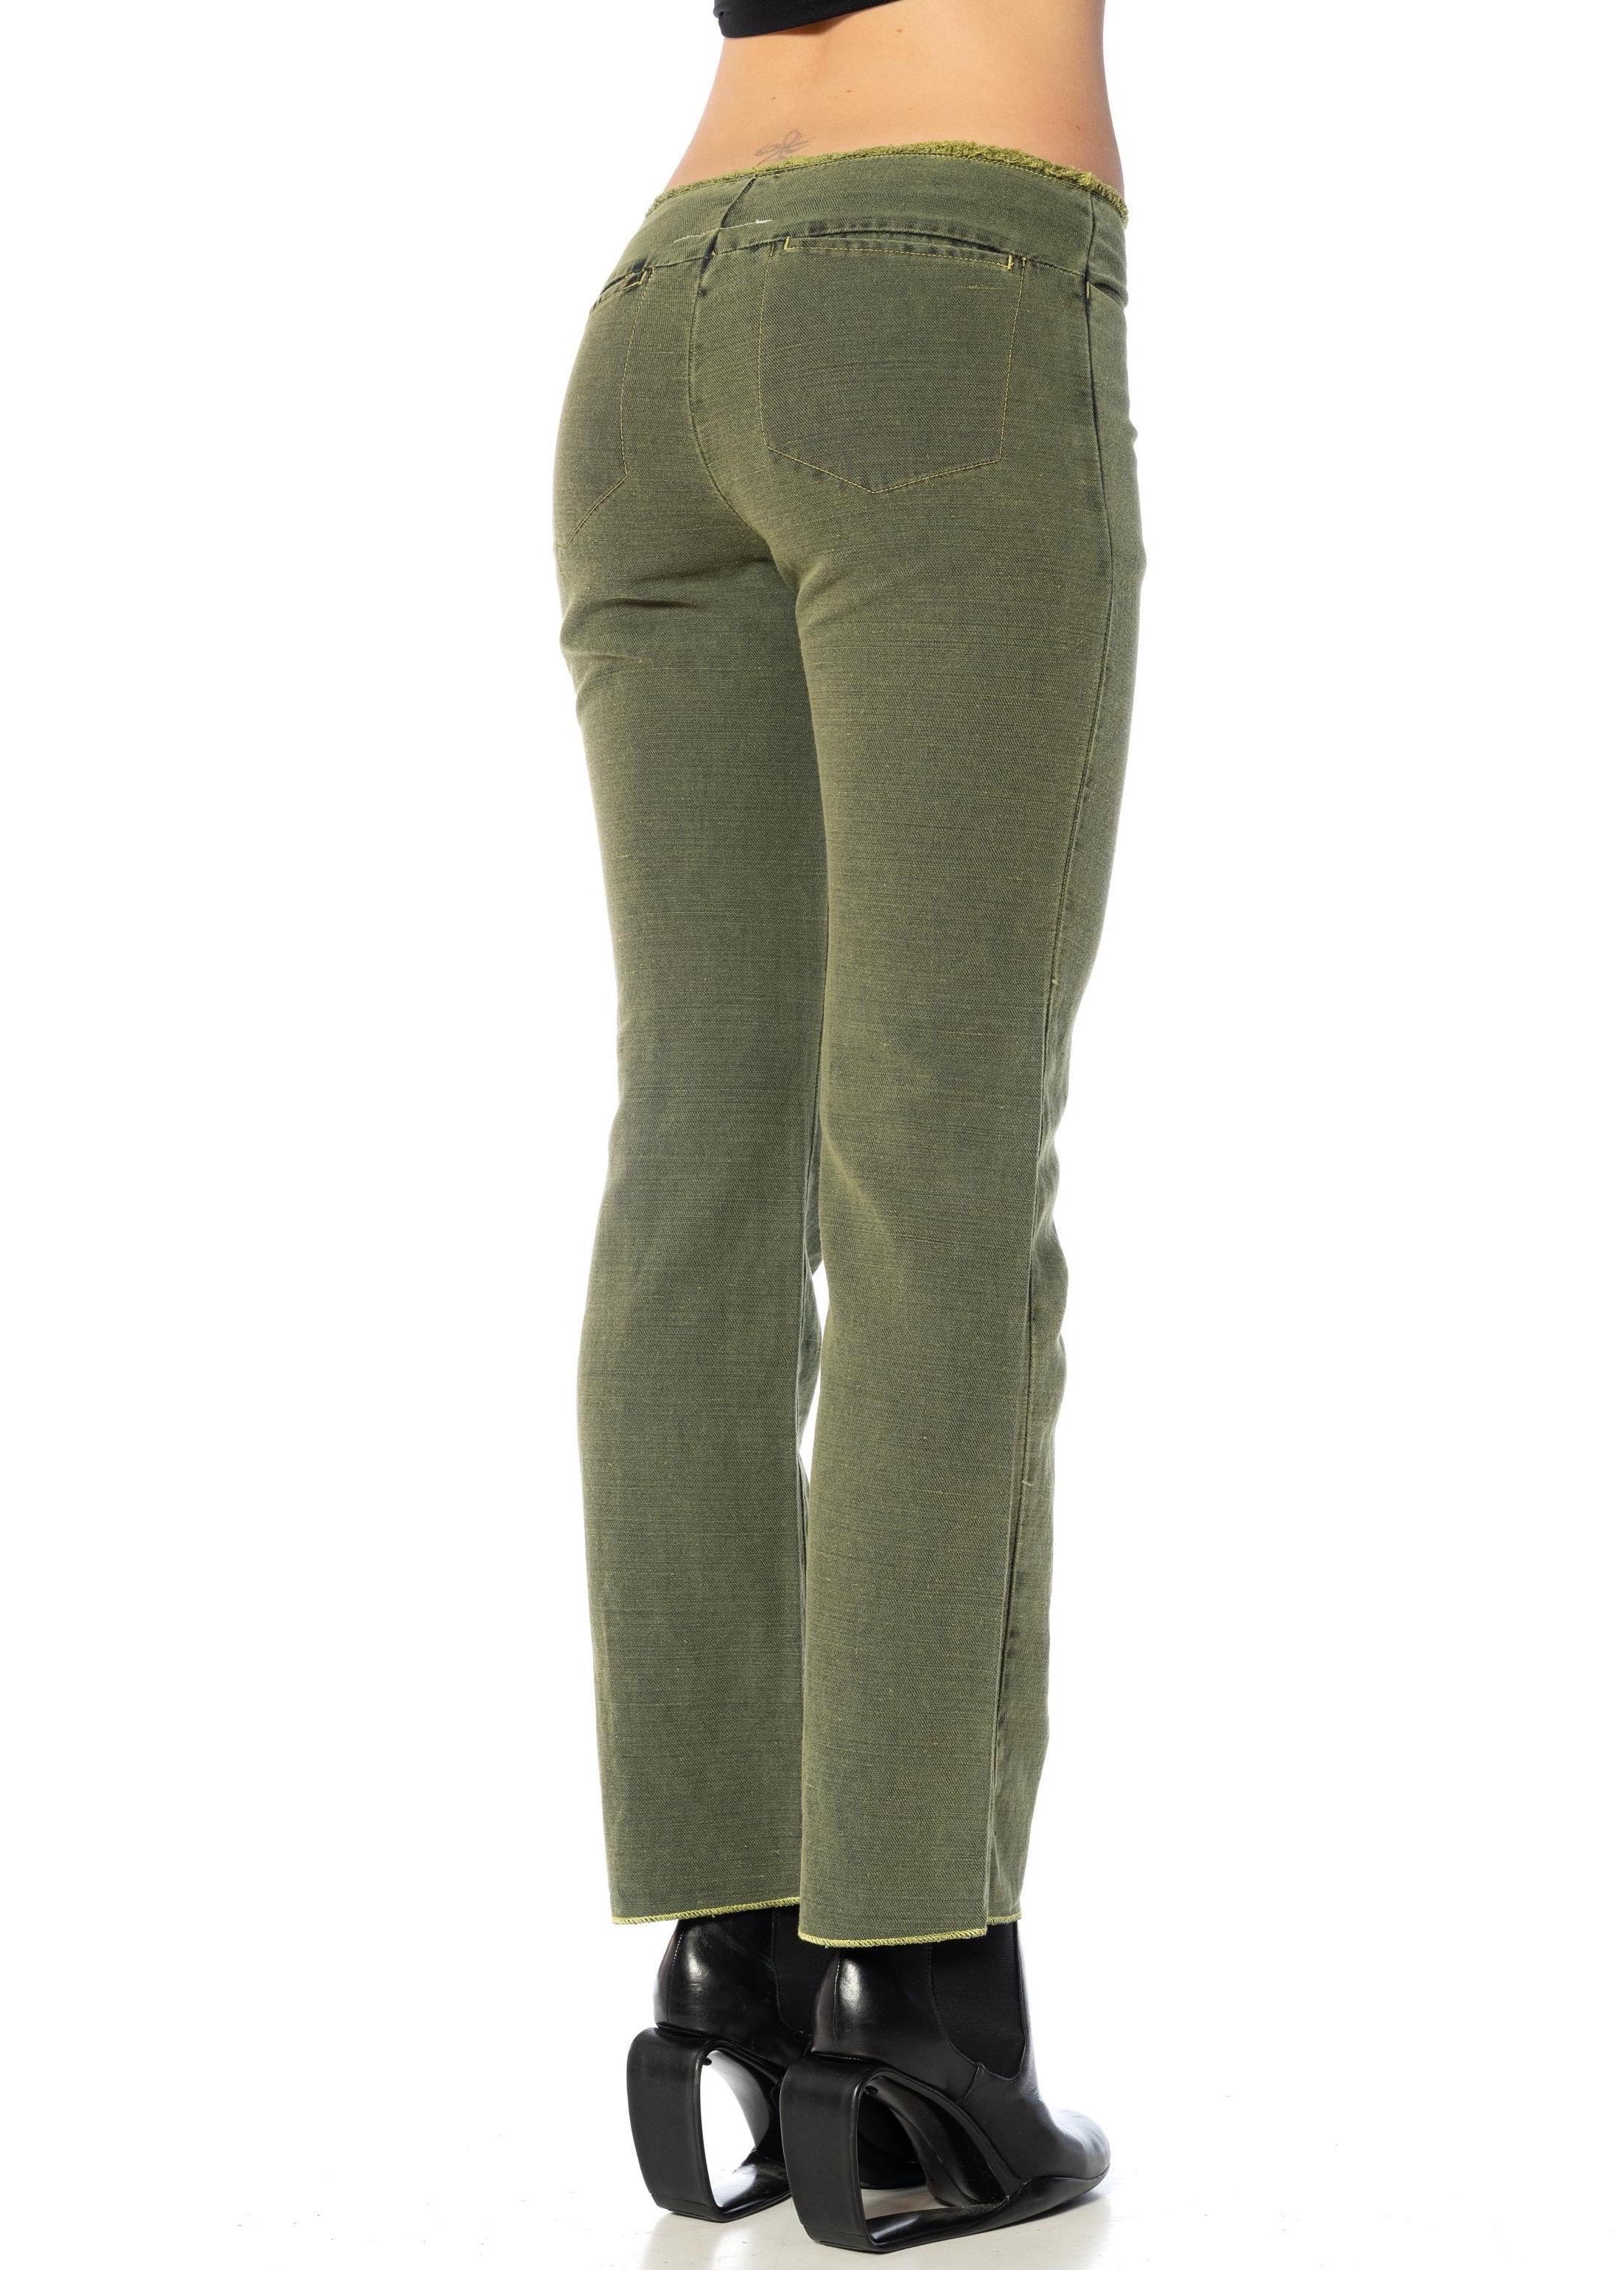 2000S MARTIN MARGIELA Forrest Green Cotton & Linen Relaxed Fit Jeans For Sale 2